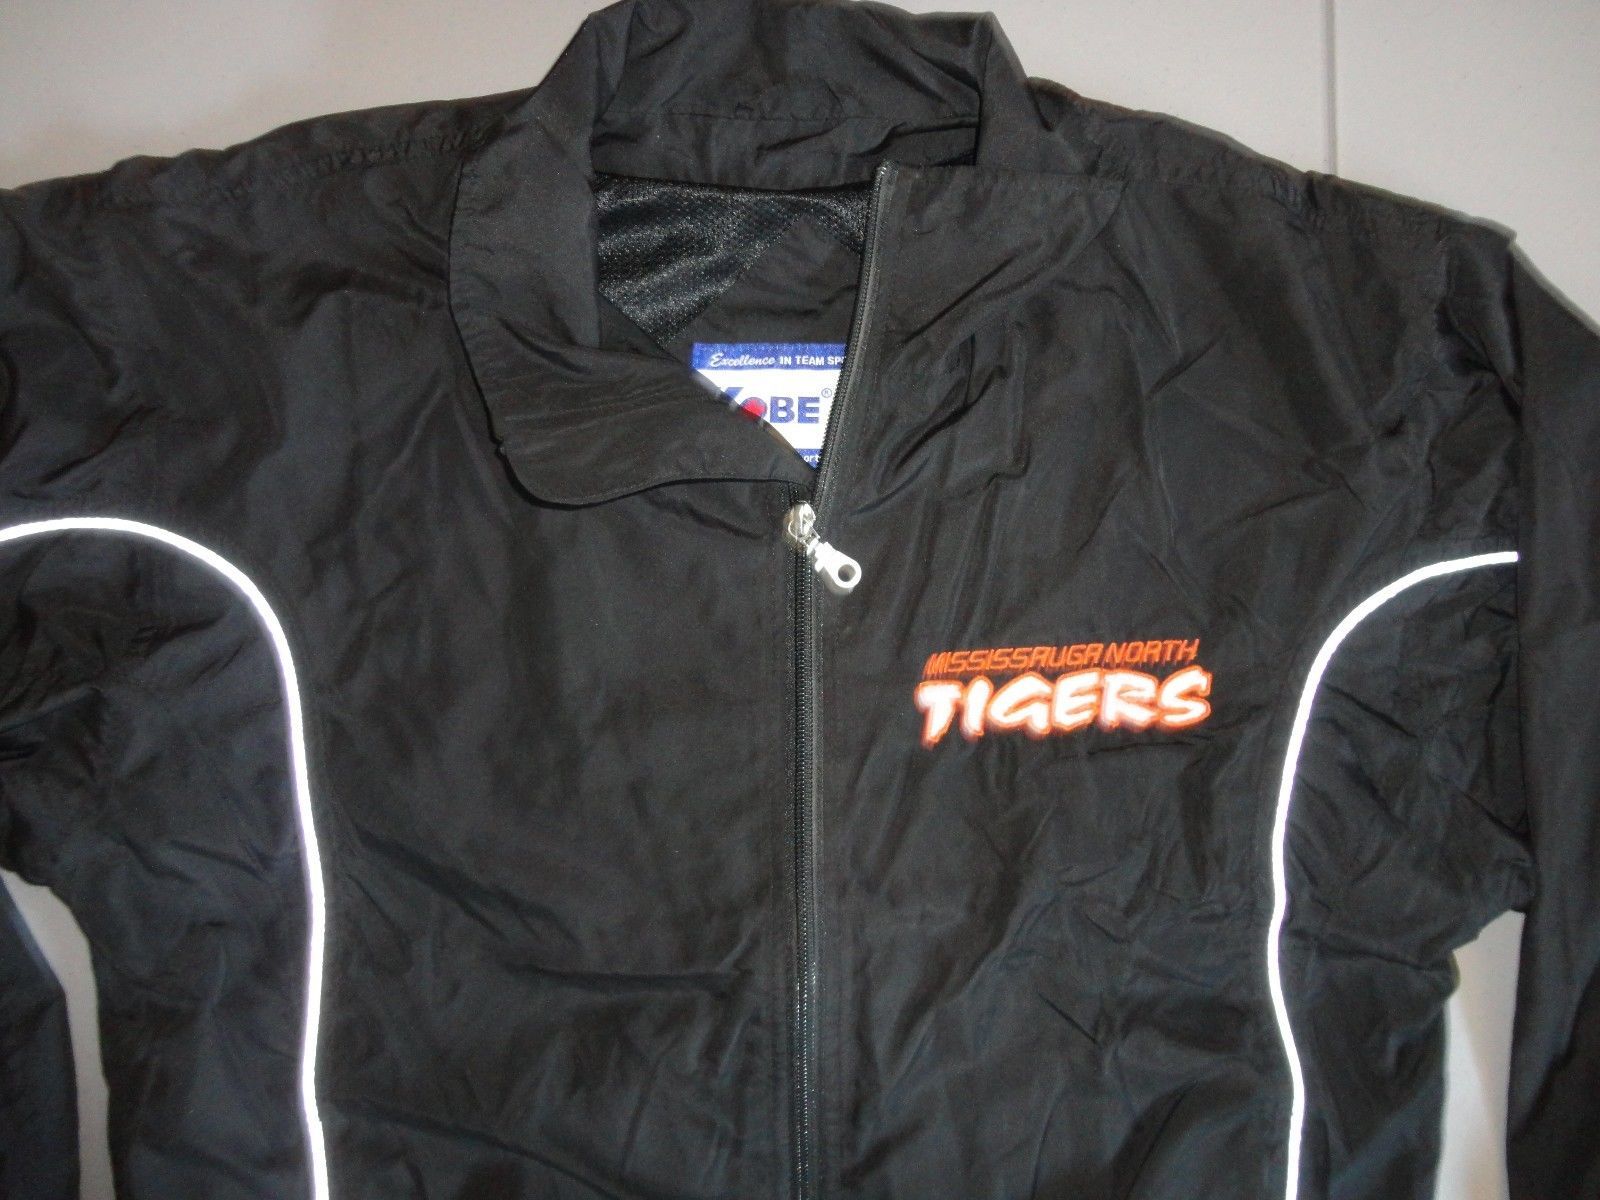 Primary image for Black KOBE Mississauga North Tigers CANADA Baseball Dugout Jacket Youth 14-16